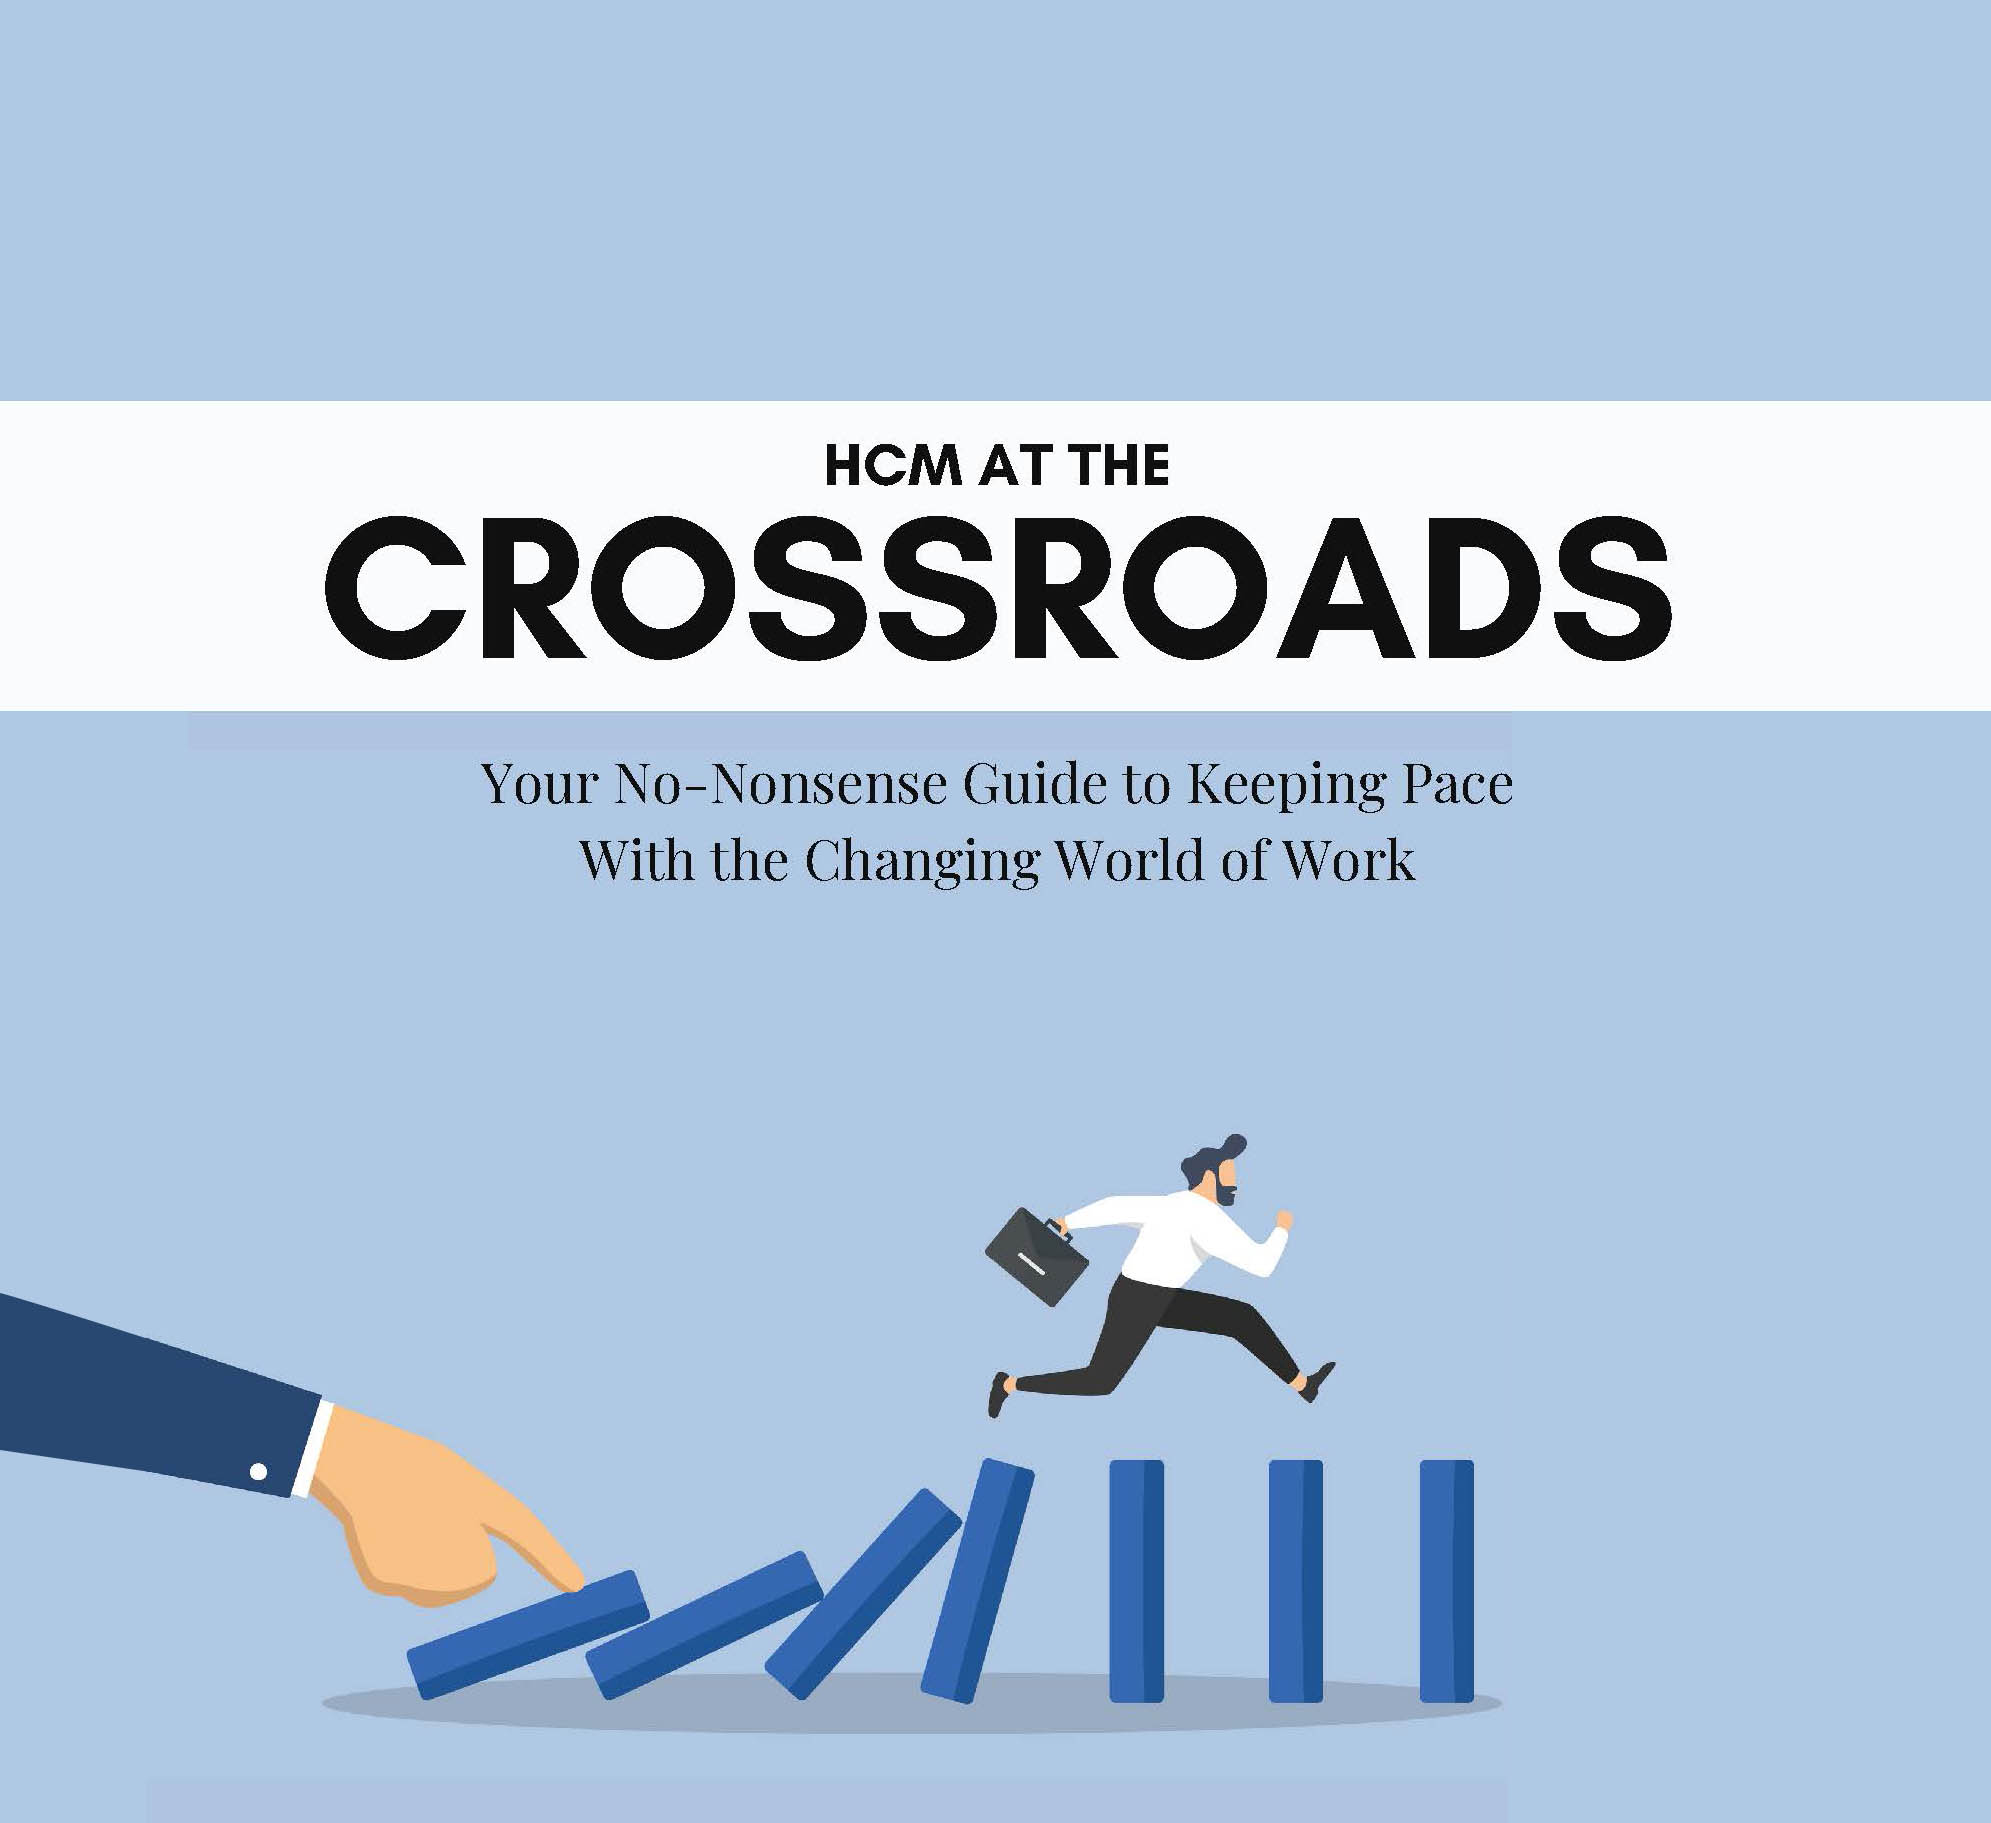 HCM at the Crossroads